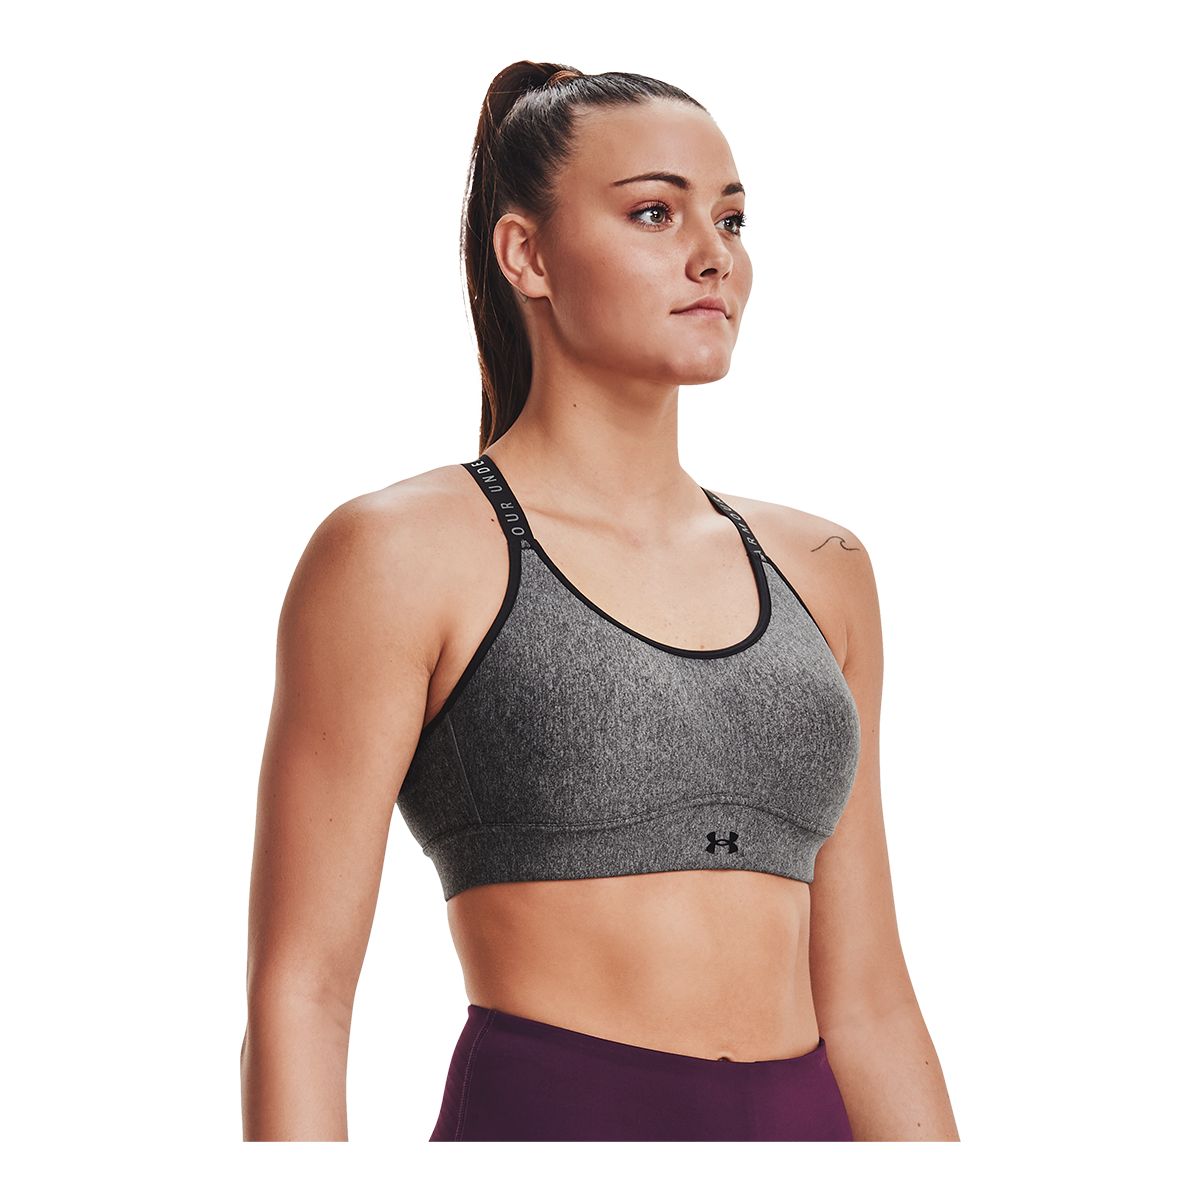 Under Armour Women's Infinity Mid Heather Cover Sports Bra